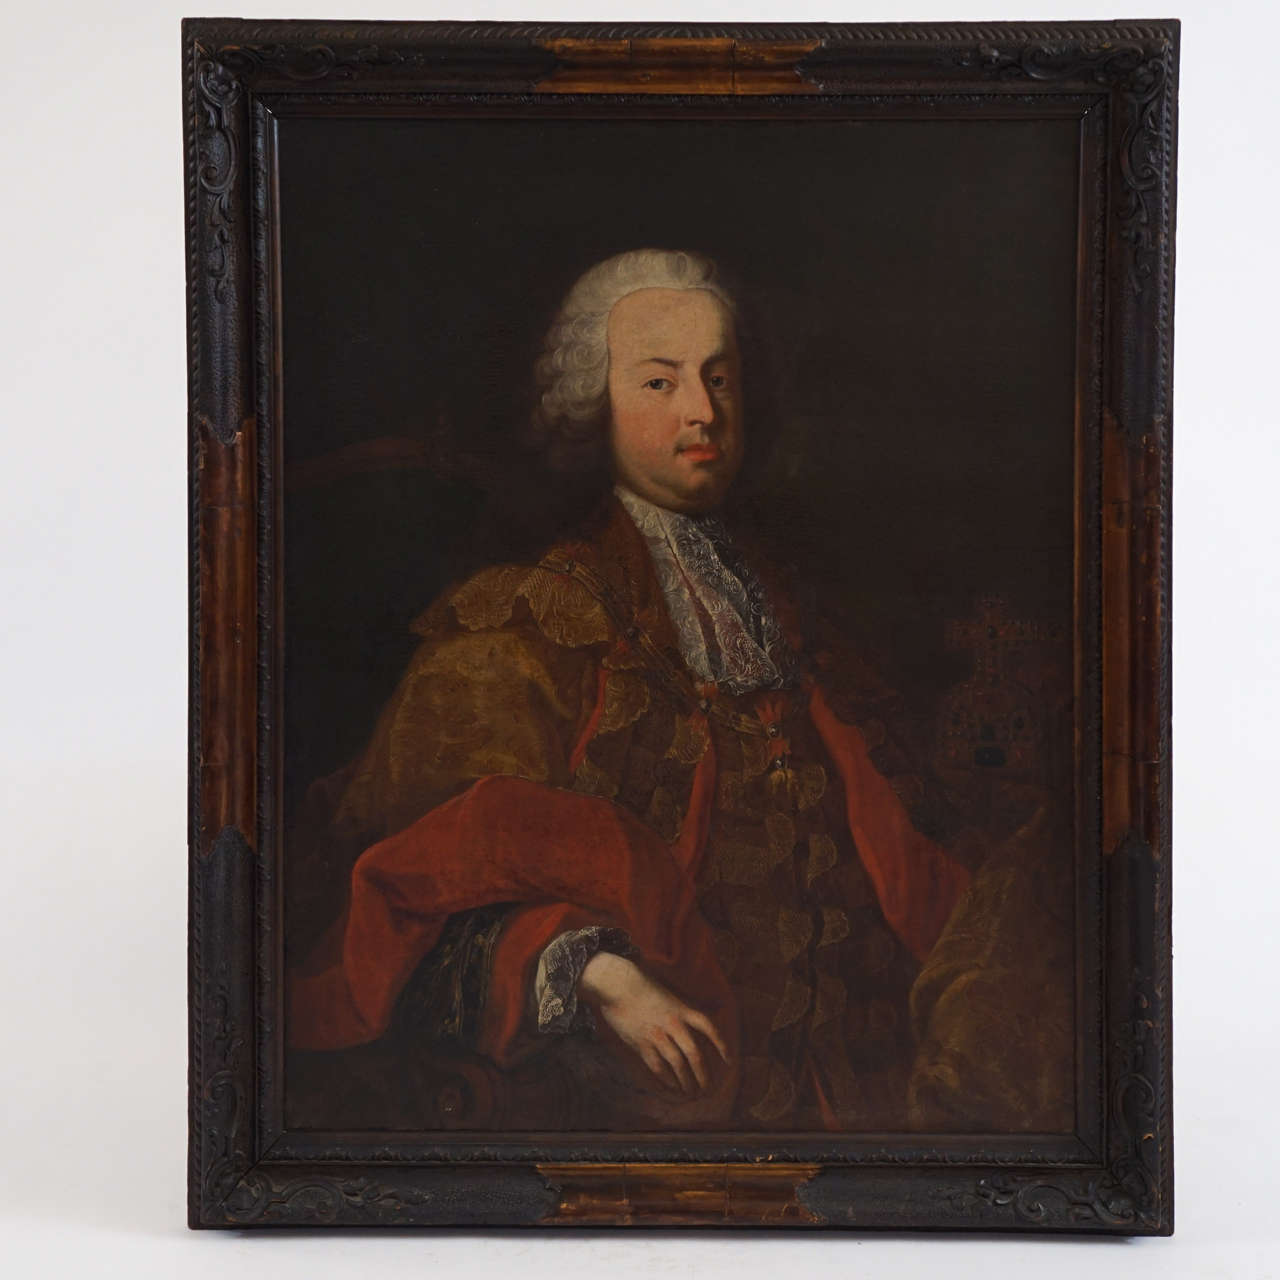 Superb circa 1750 oil on canvas portrait by the workshop of Martin van Meytens the Younger of Holy Roman Emperor Francis I, Grand Duke of Tuscany, Duke of Lorraine, founder of the Habsburg-Lorraine Dynasty, and father of Marie Antoinette in original